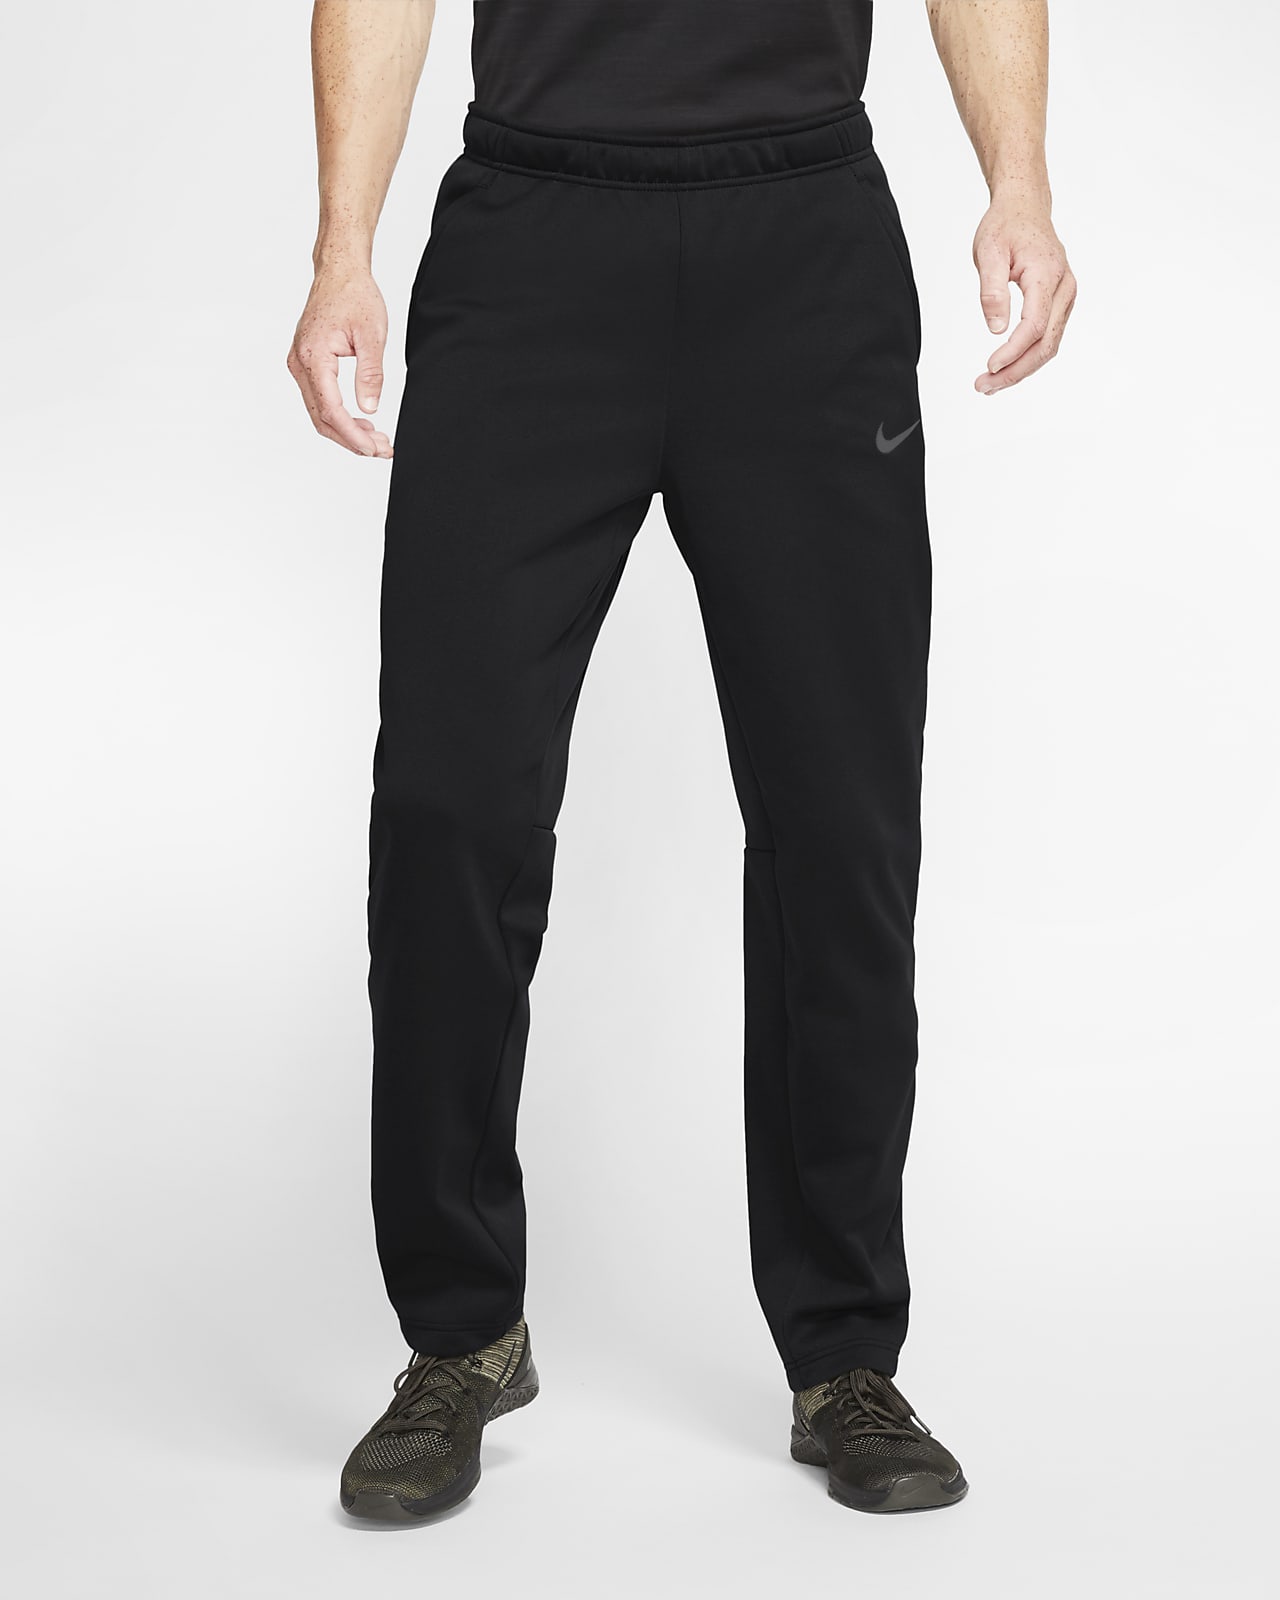 Nike Dri-Fit Athletic Pants Men's Dark Gray New with Tags L 193